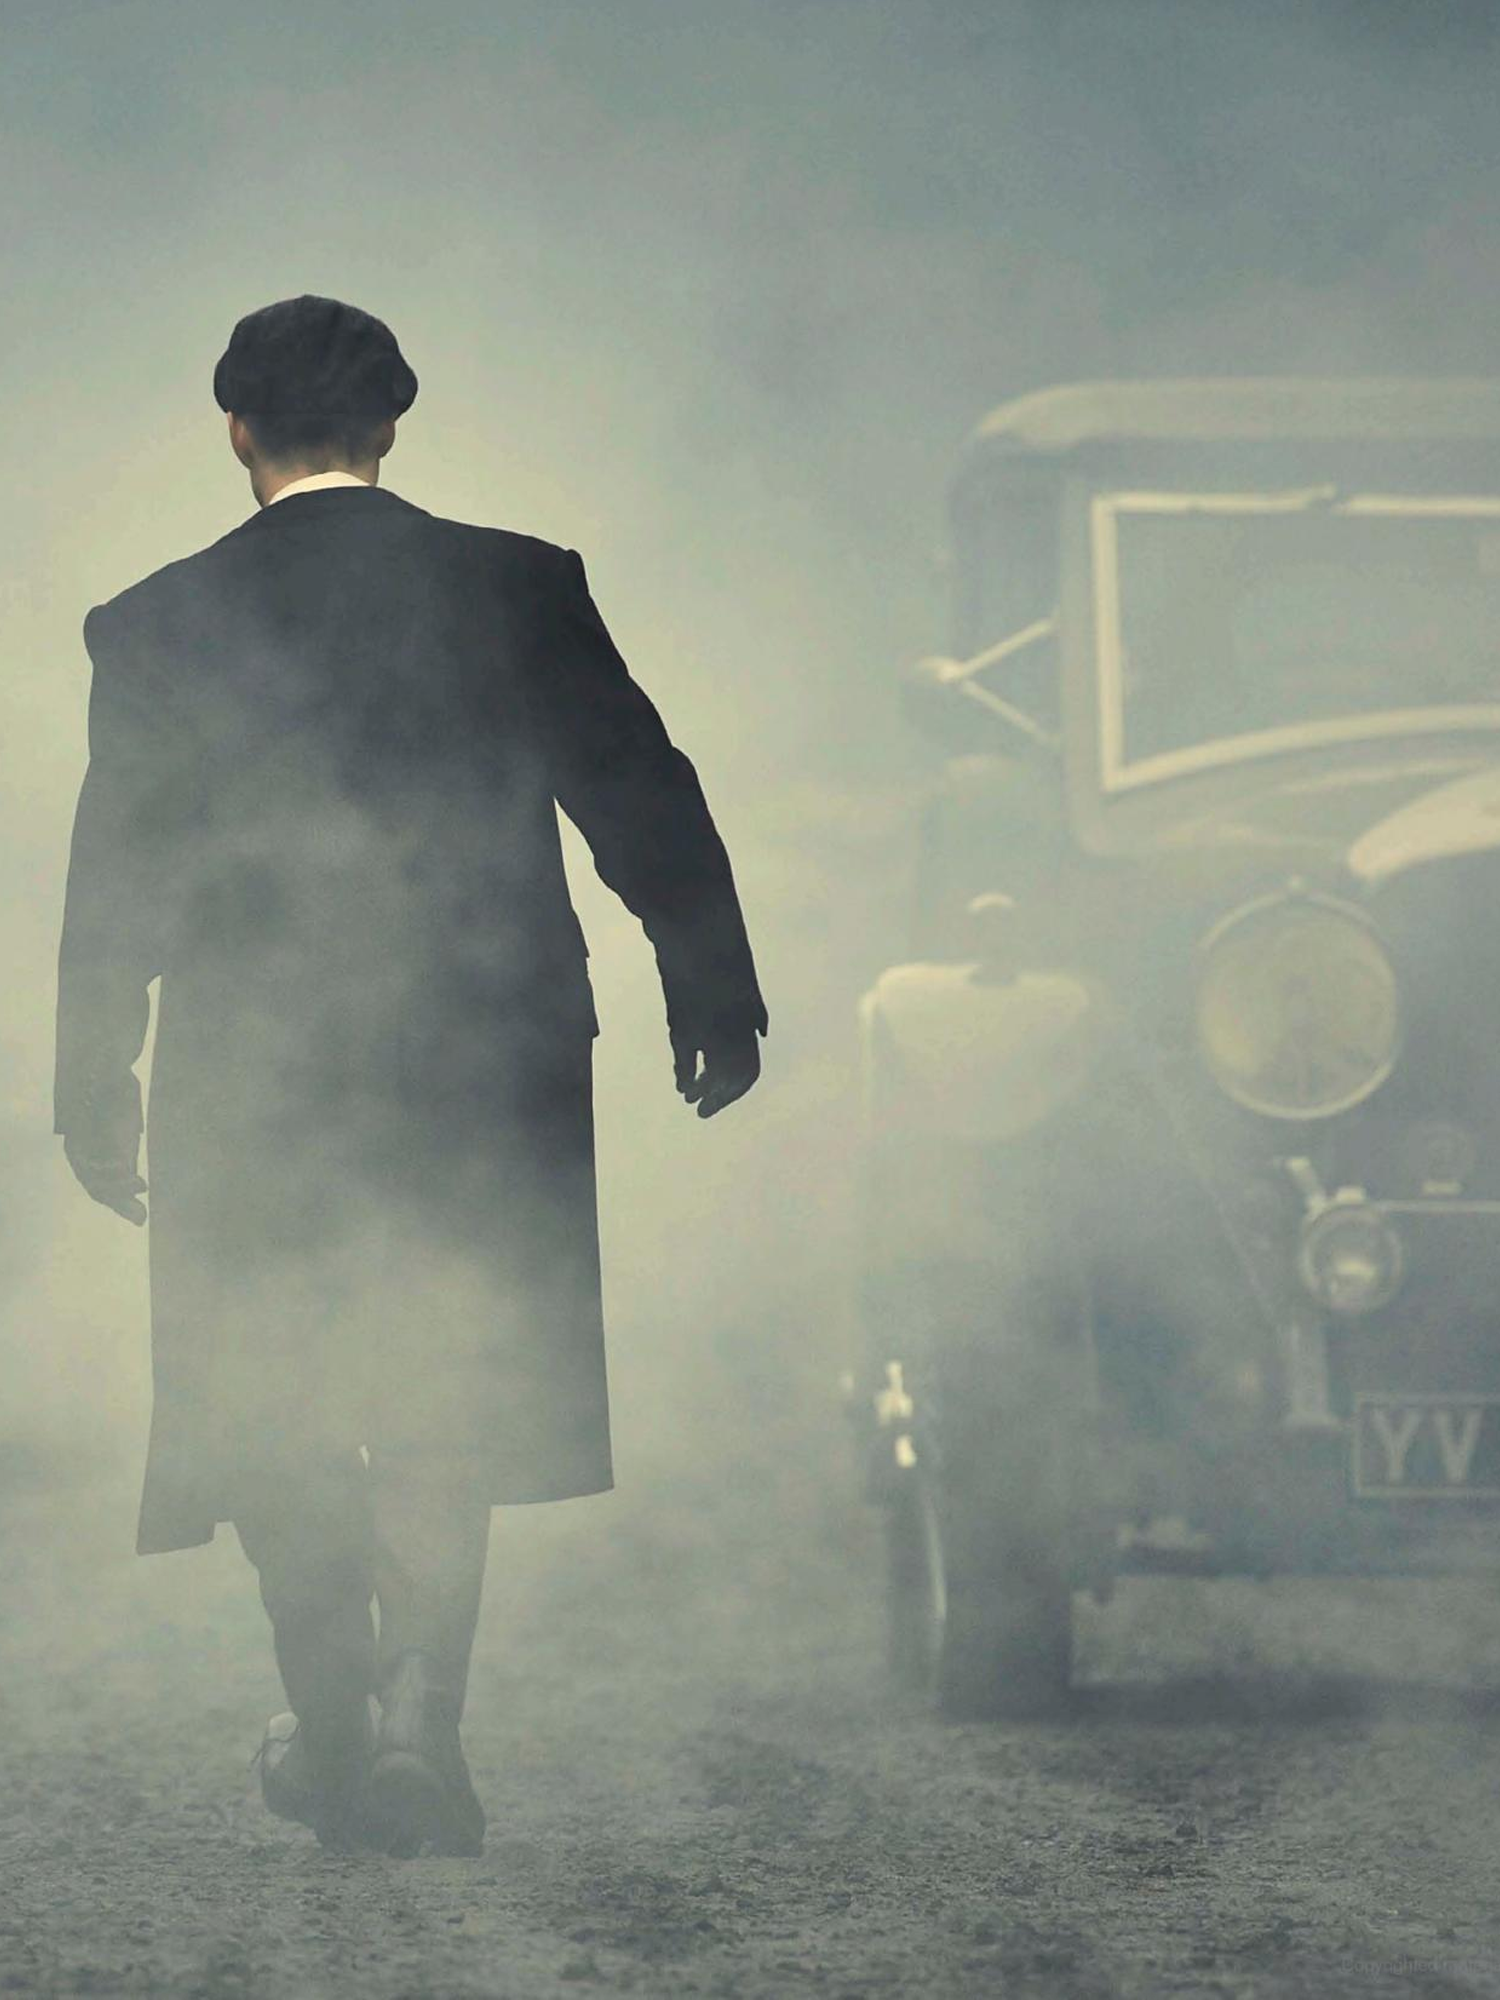 Peaky Blinders Bags  Shelby Brothers store